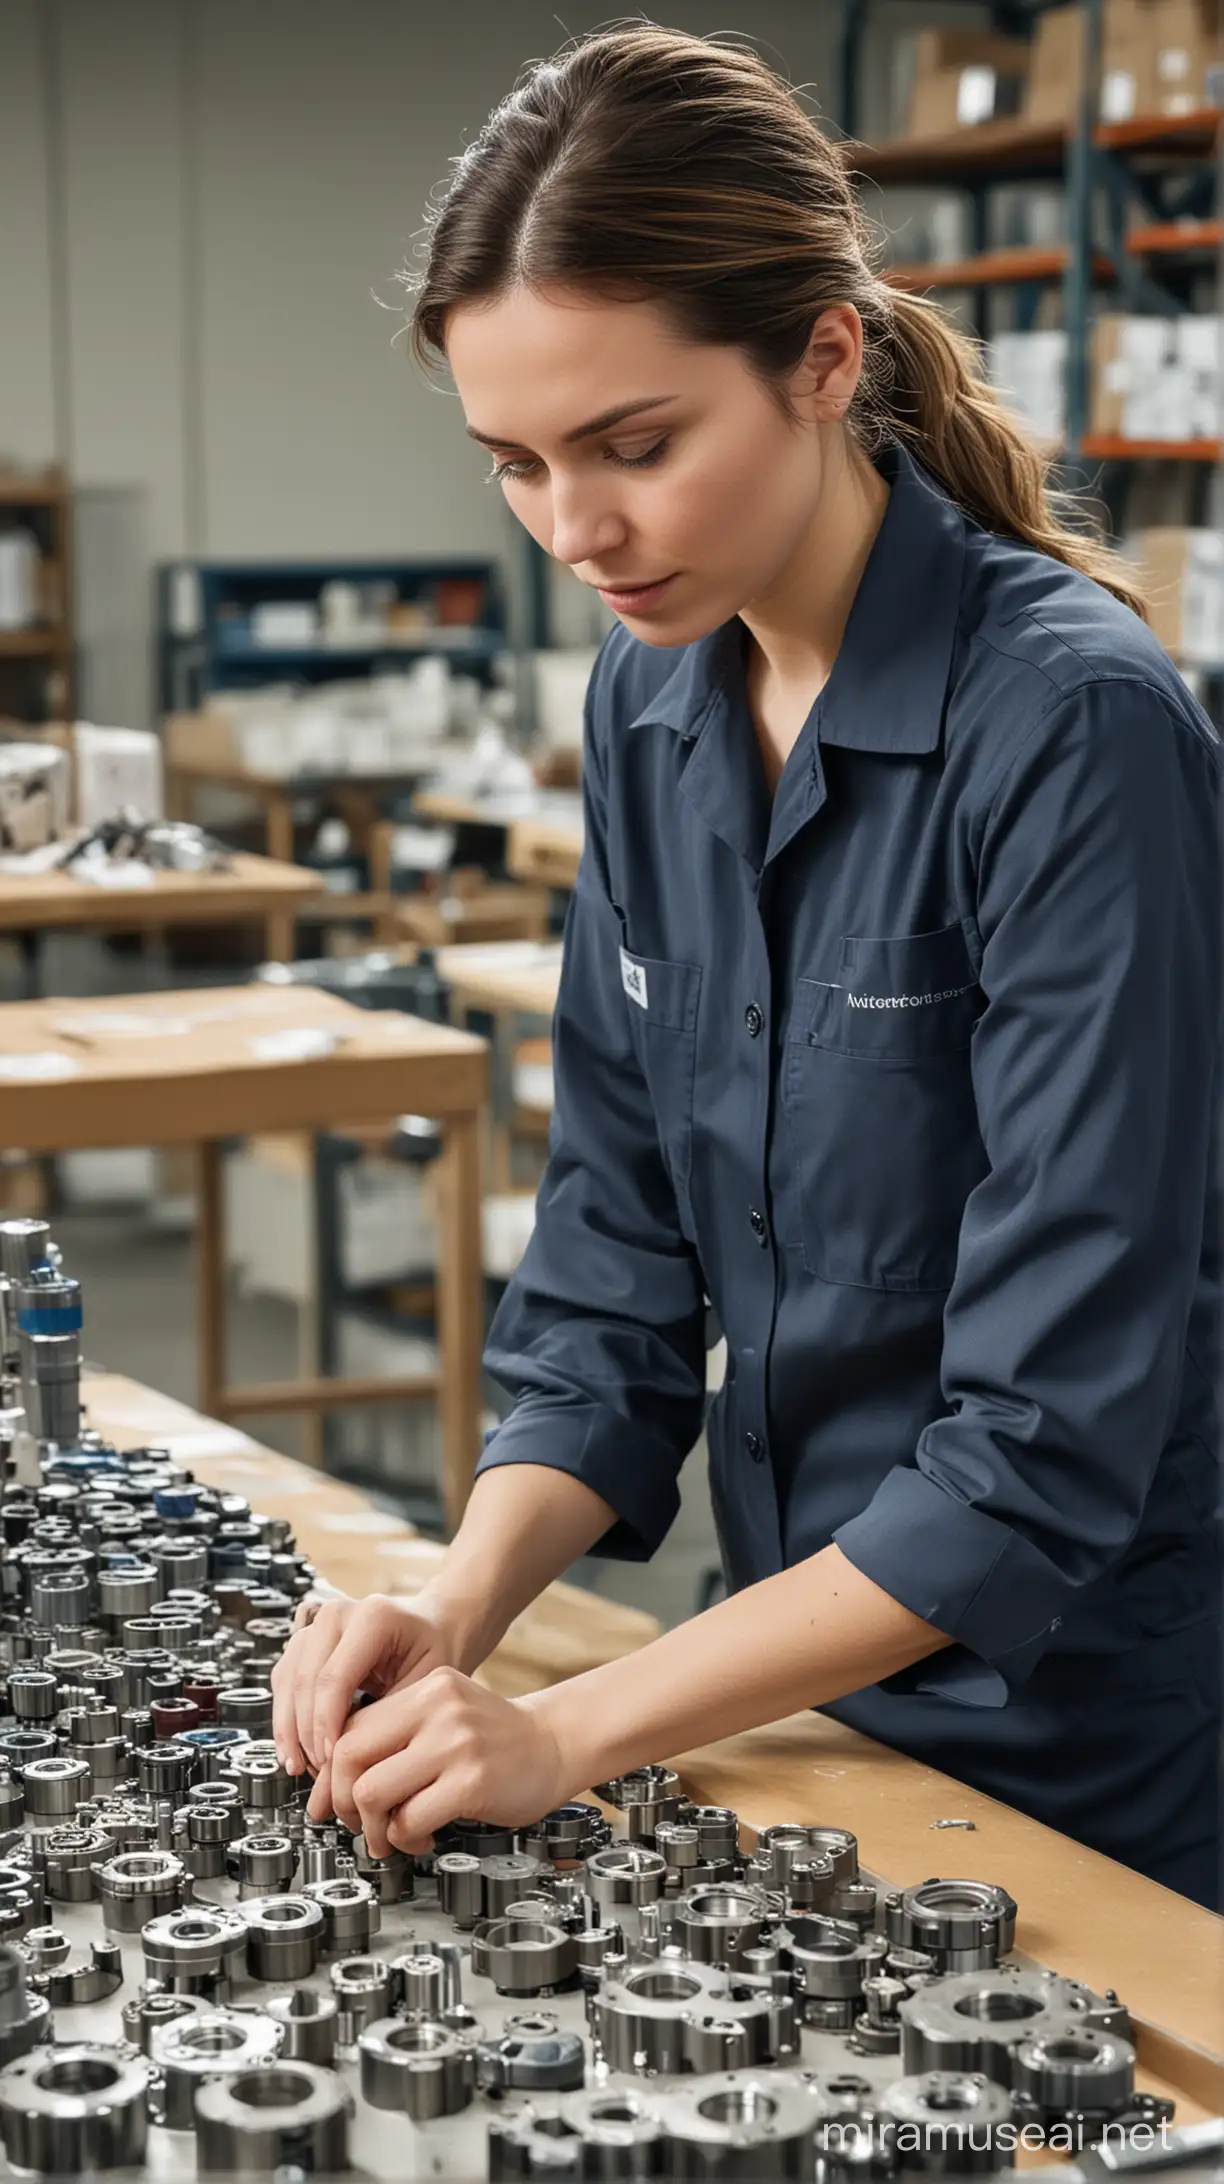 The image features a female employee of Voyapa meticulously inspecting and packaging spare parts. She should exude a functional and professional appearance, projecting seriousness and meticulousness in her task, with a demeanor that inspires confidence. In the background, there should be a clean and orderly workspace, emphasizing professionalism and attention to detail. The overall image should convey a sense of professionalism, quality, and trust.